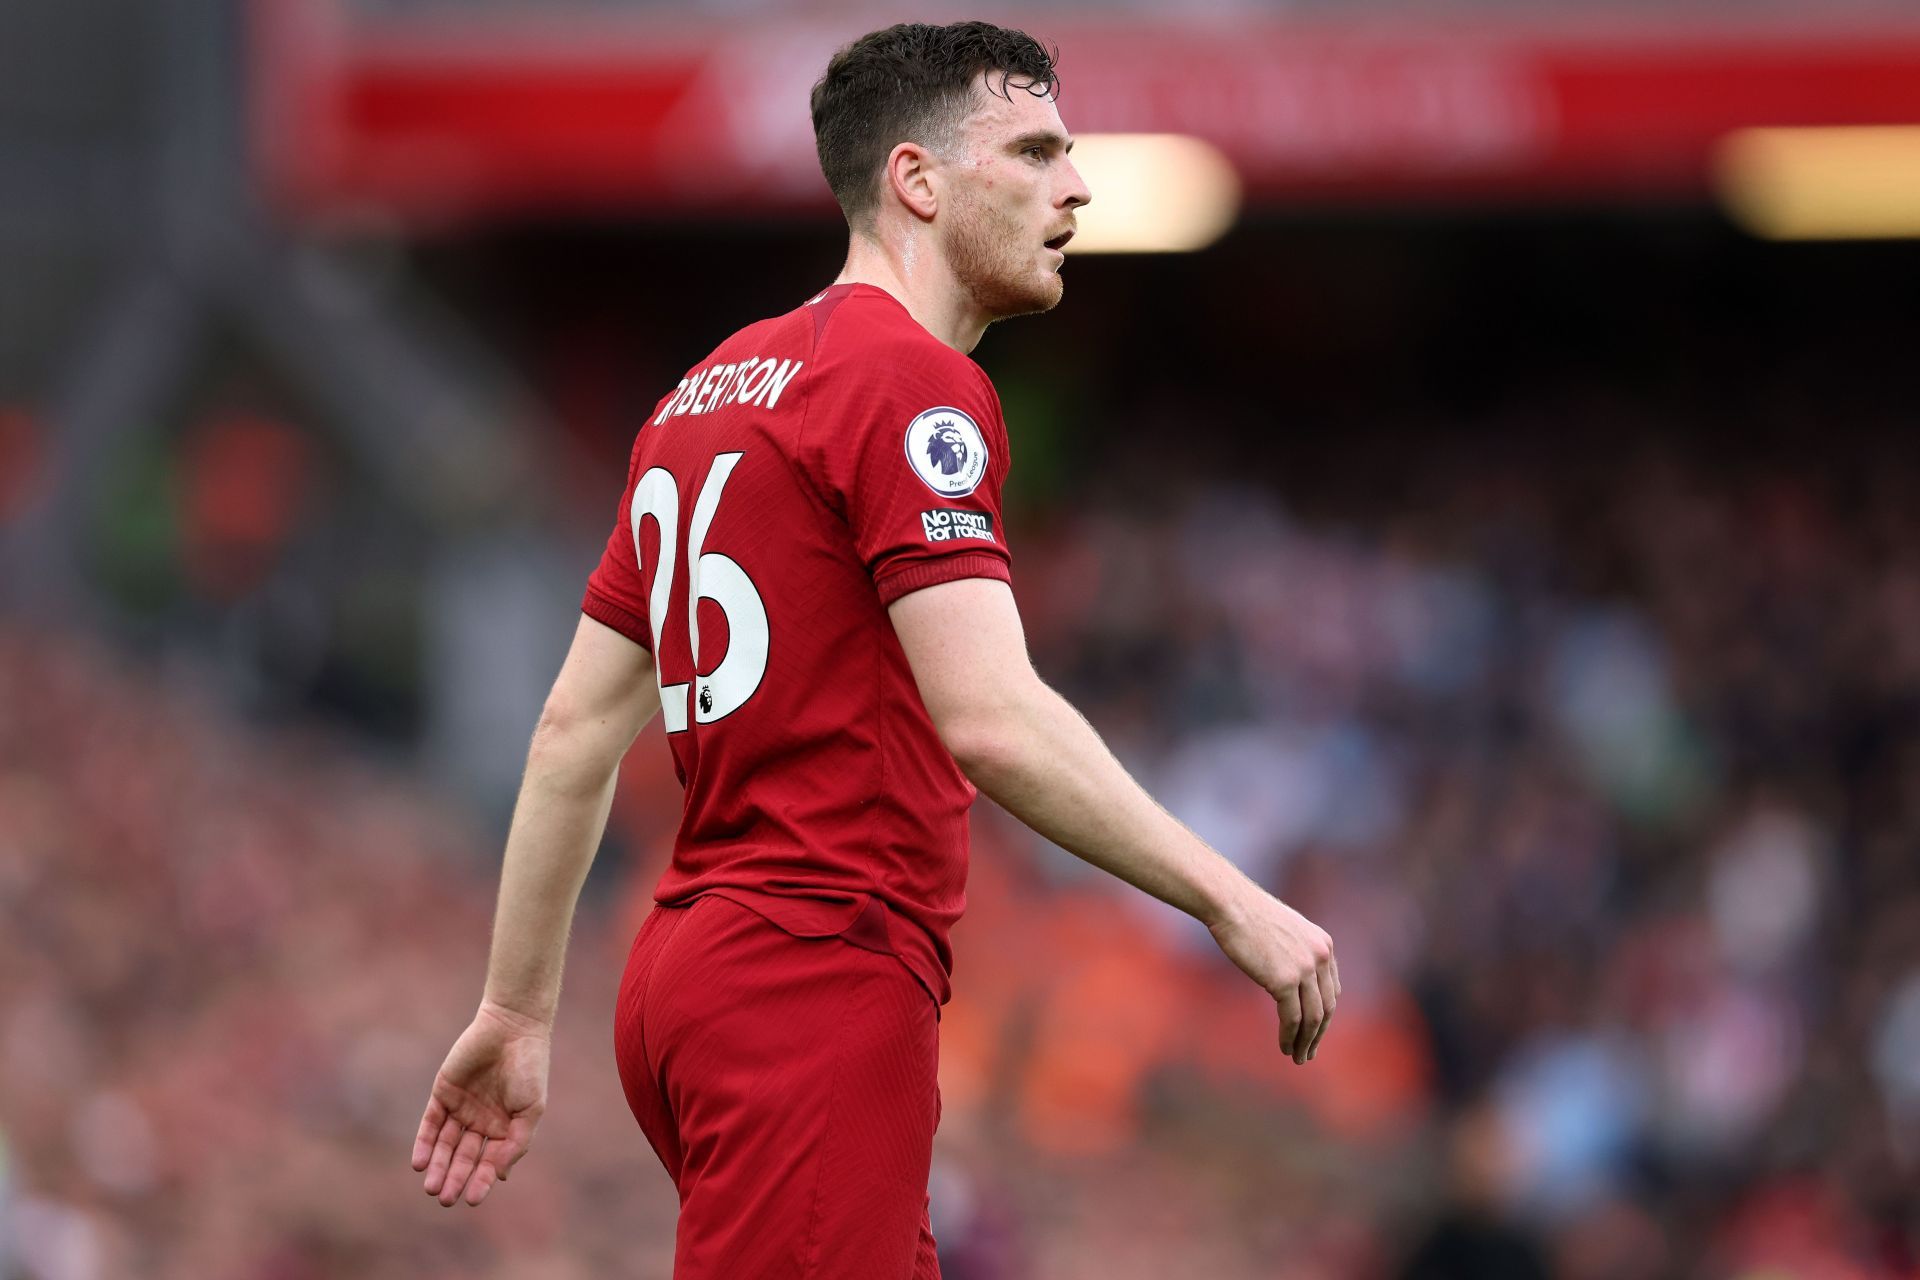 Andy Robertson is the leading assister from a Premier League defender.